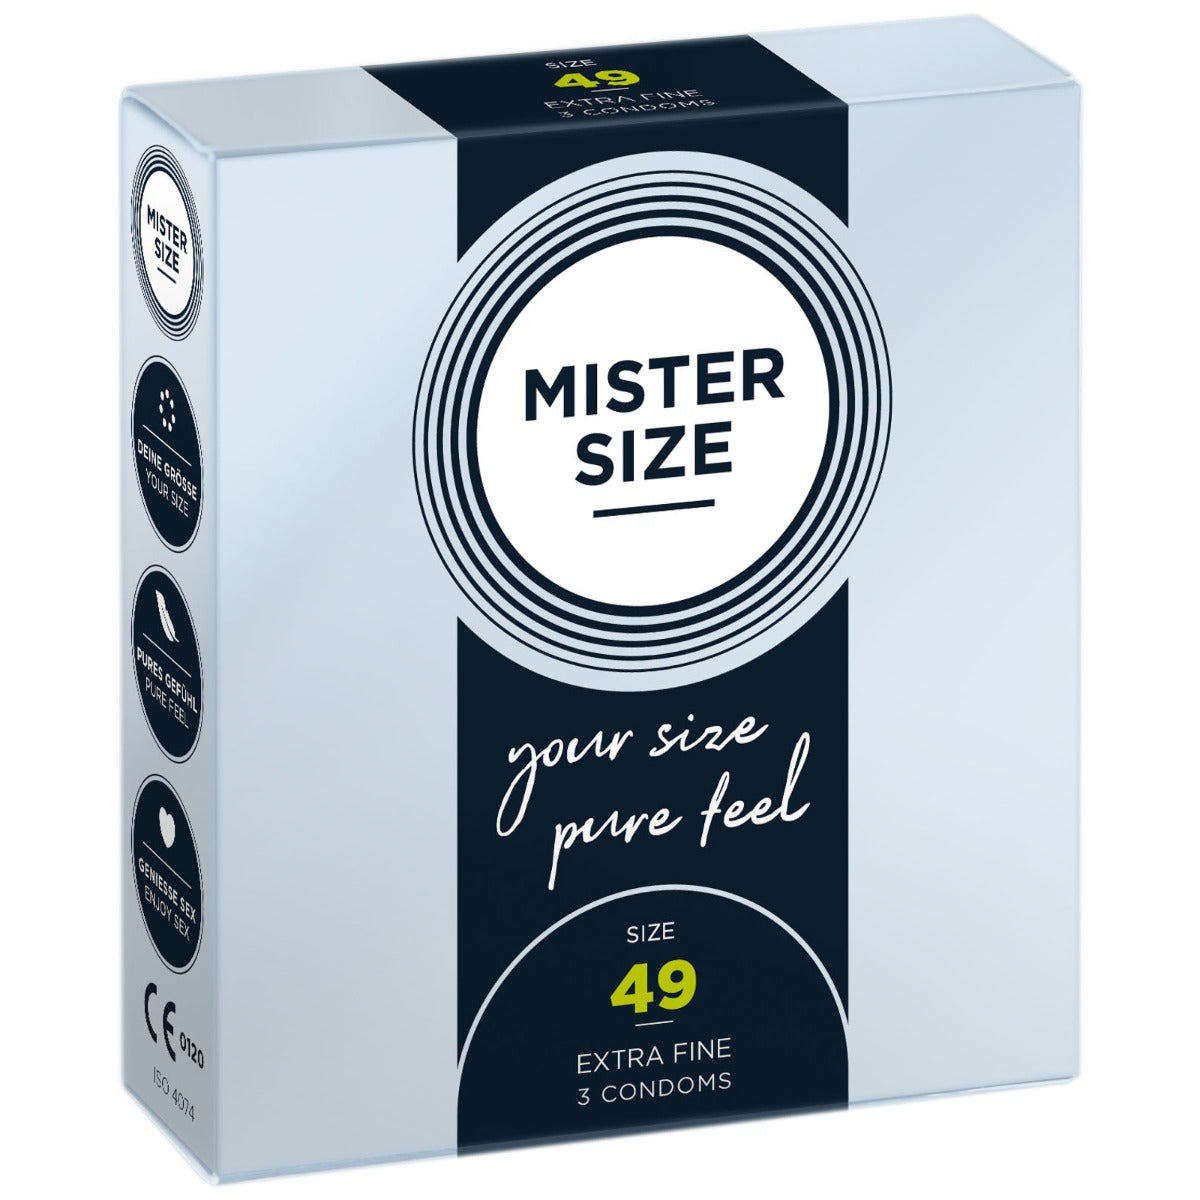 Condoms MISTER SIZE - pure feel Condoms - size 49 mm (3 pack)   